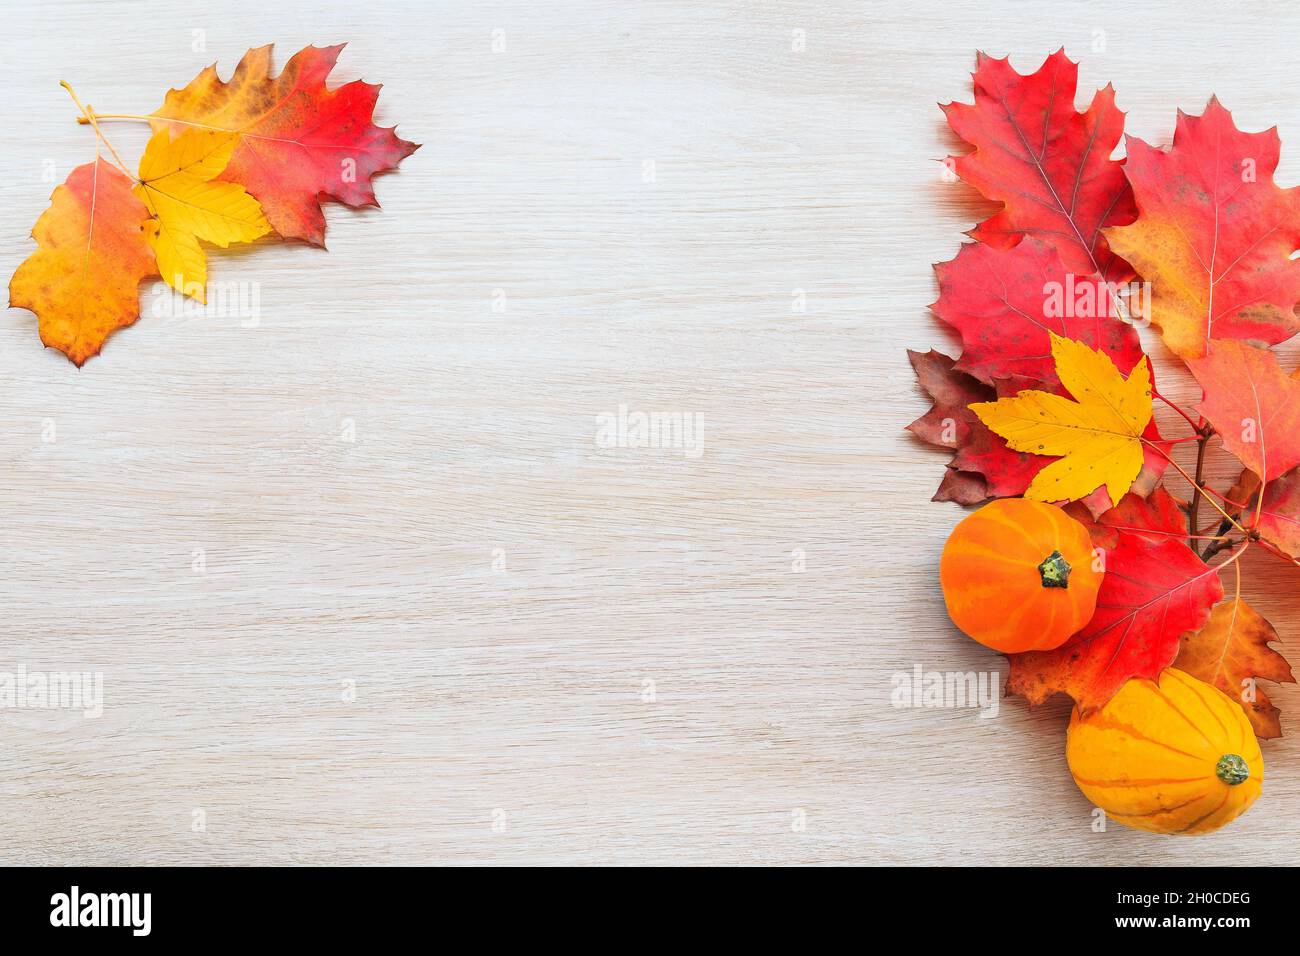 Autumn decor from pumpkins and leaves on a wooden background. Flat lay autumn composition with copy space. Stock Photo